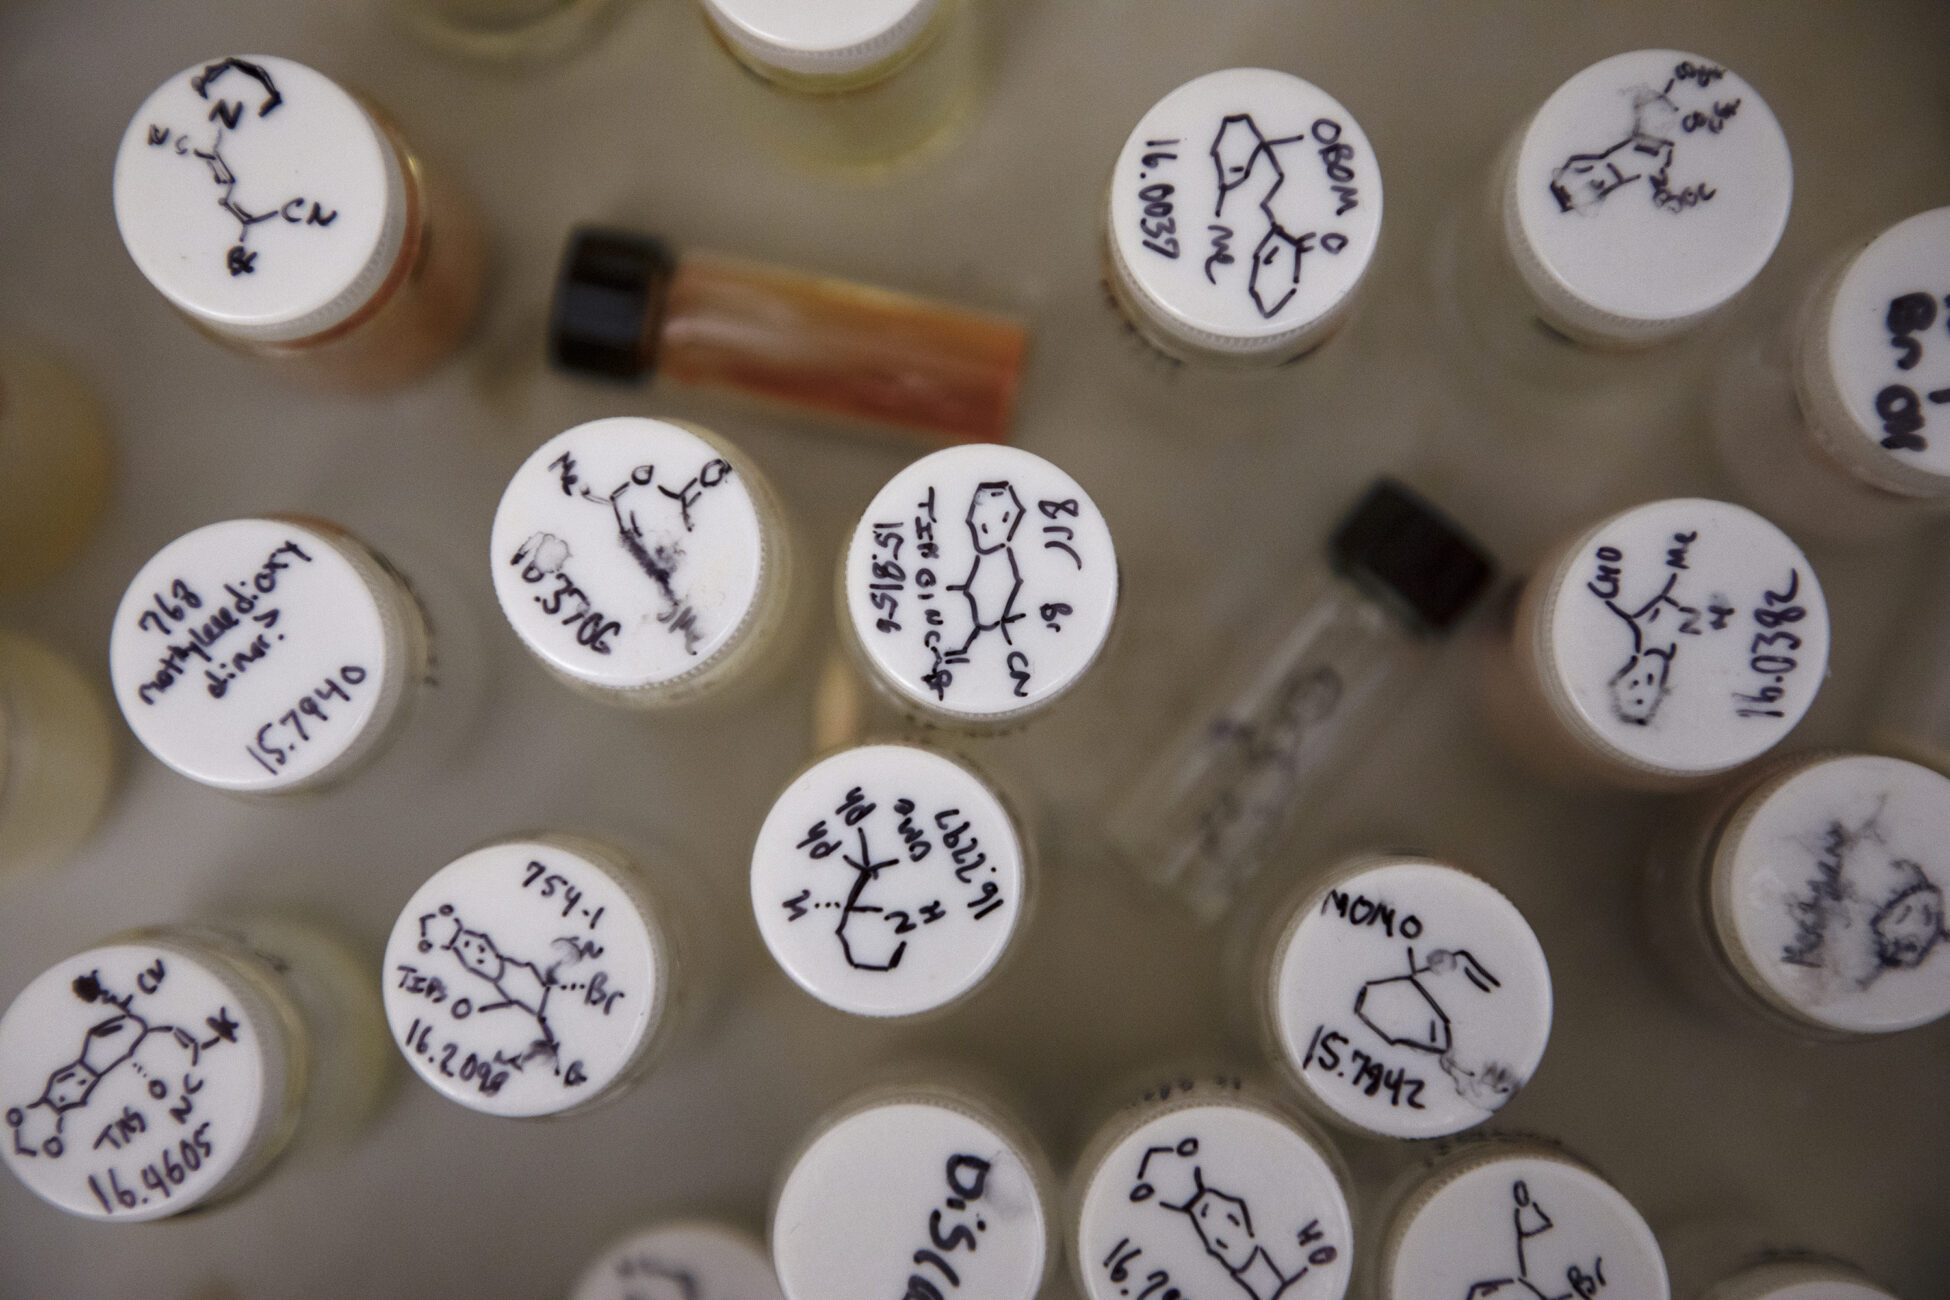 Vials of organic compounds sit in a station of the Wilkerson-Hill lab. (photo by Megan May)